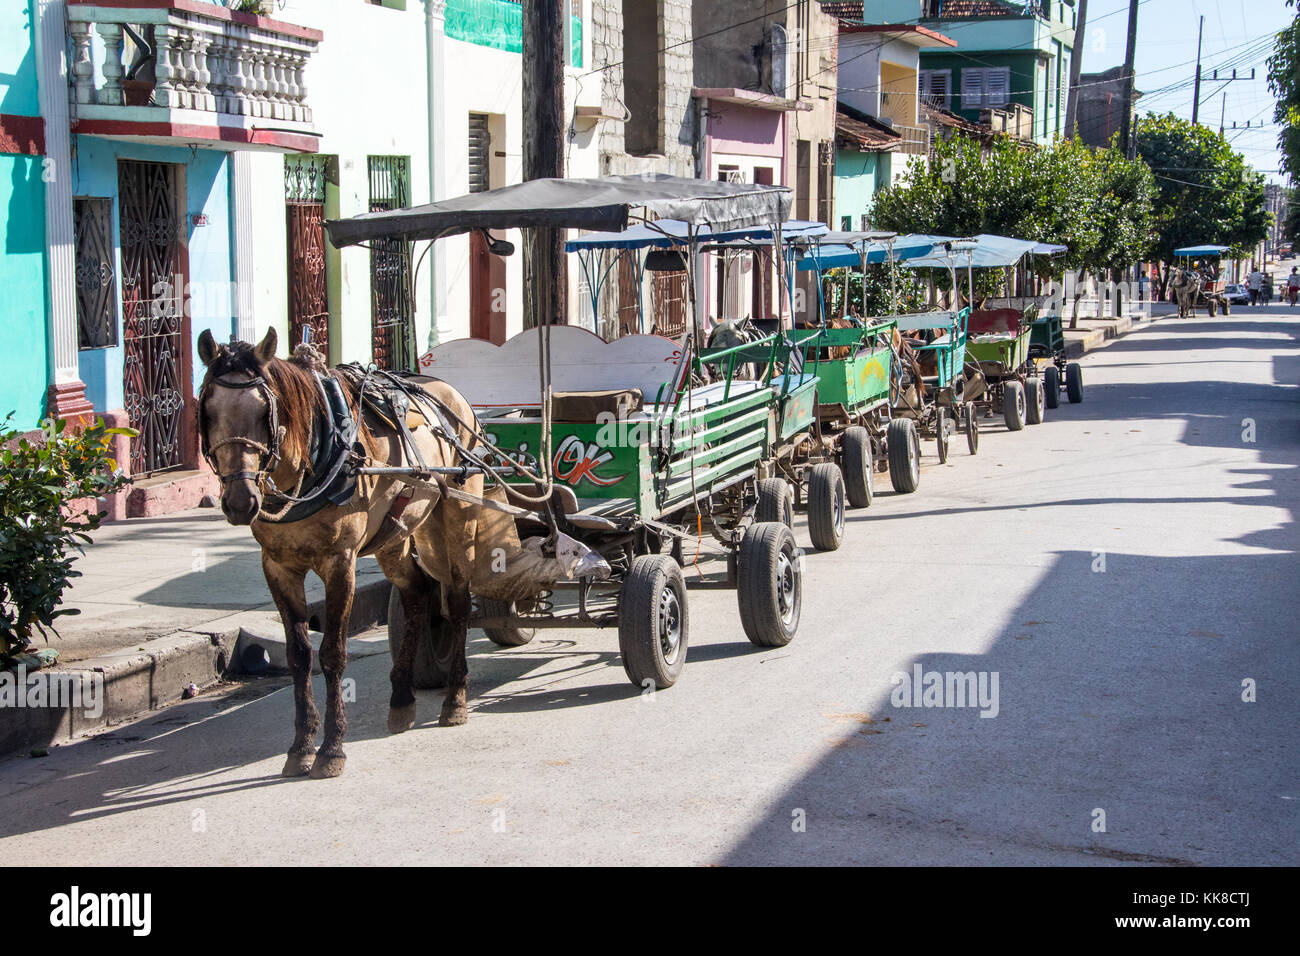 Horse carriage taxis in a row in Cienfuegos, Cuba Stock Photo